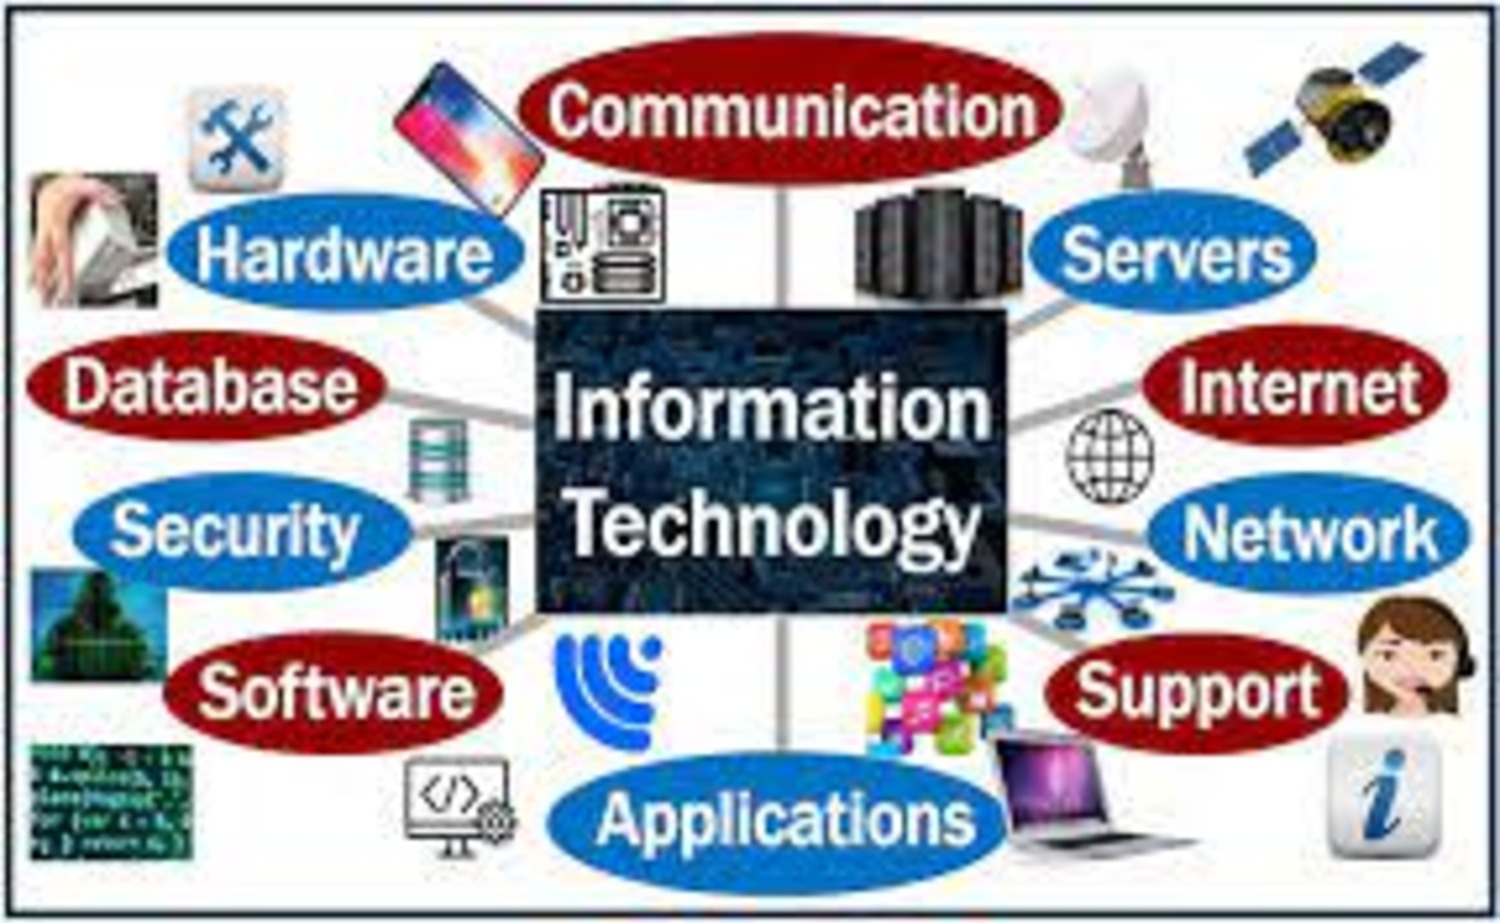 Information Technology Definition